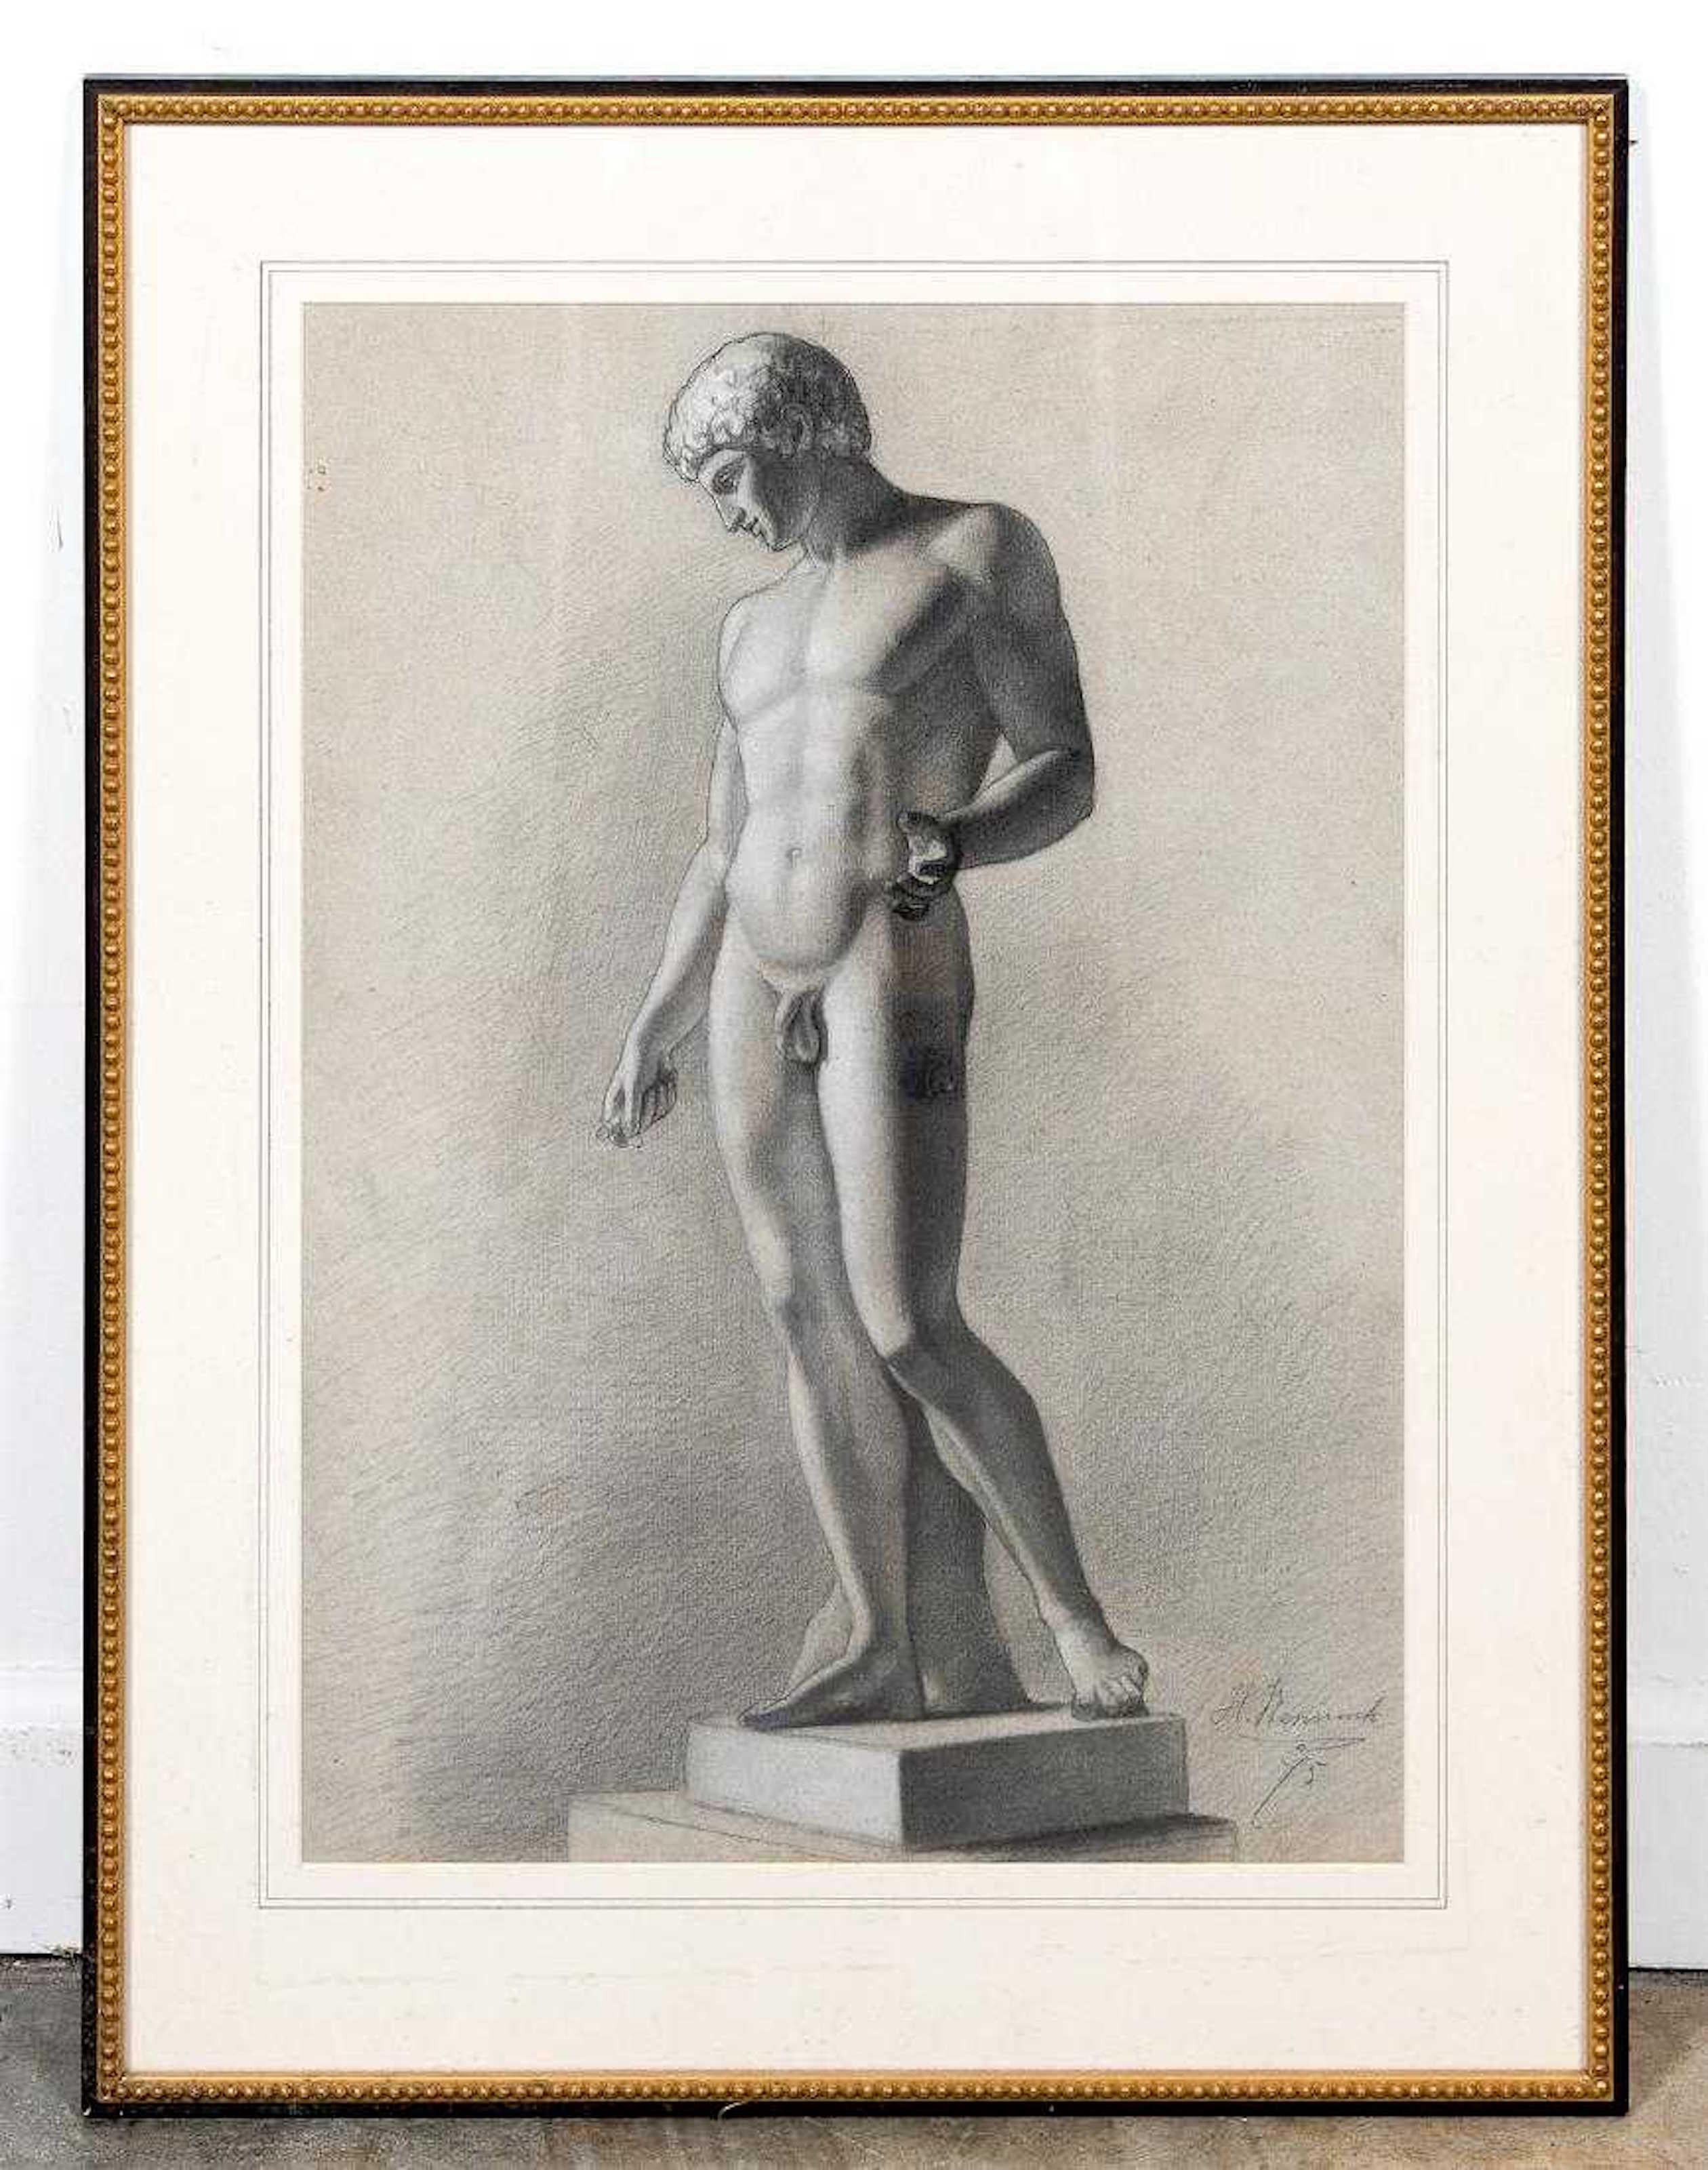 French grand tour study drawing of an Roman antiquity sculpture of a male youth, Conte Crayon, Signed 